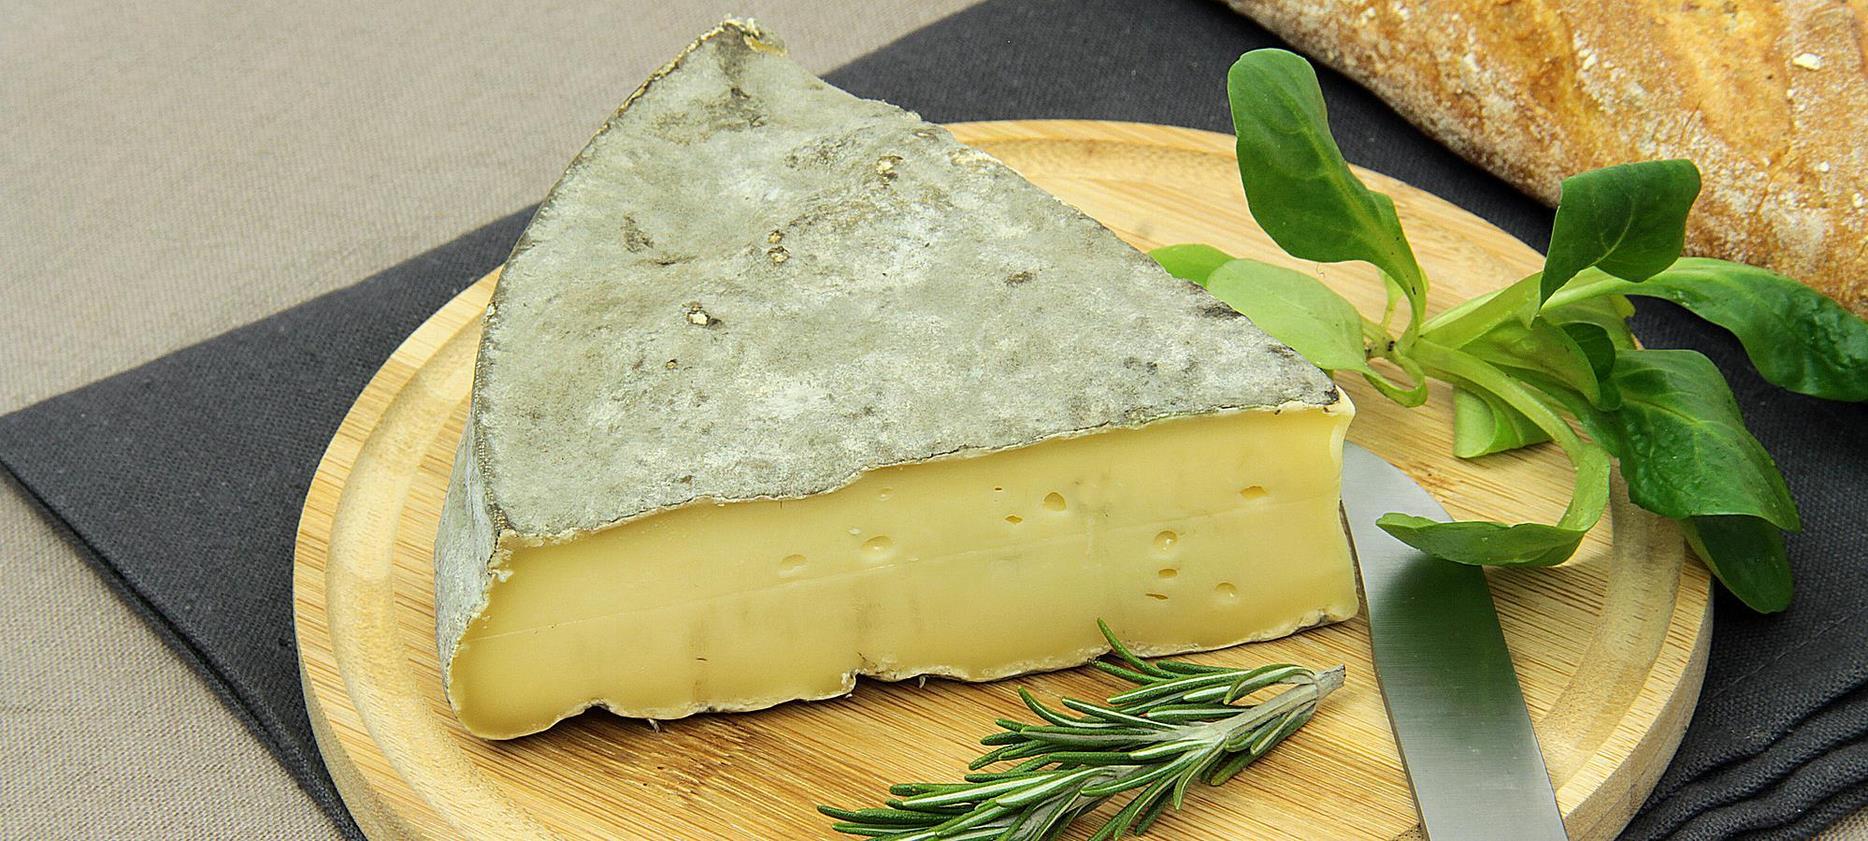 Saint Nectaire - AOC Cheese from Auvergne